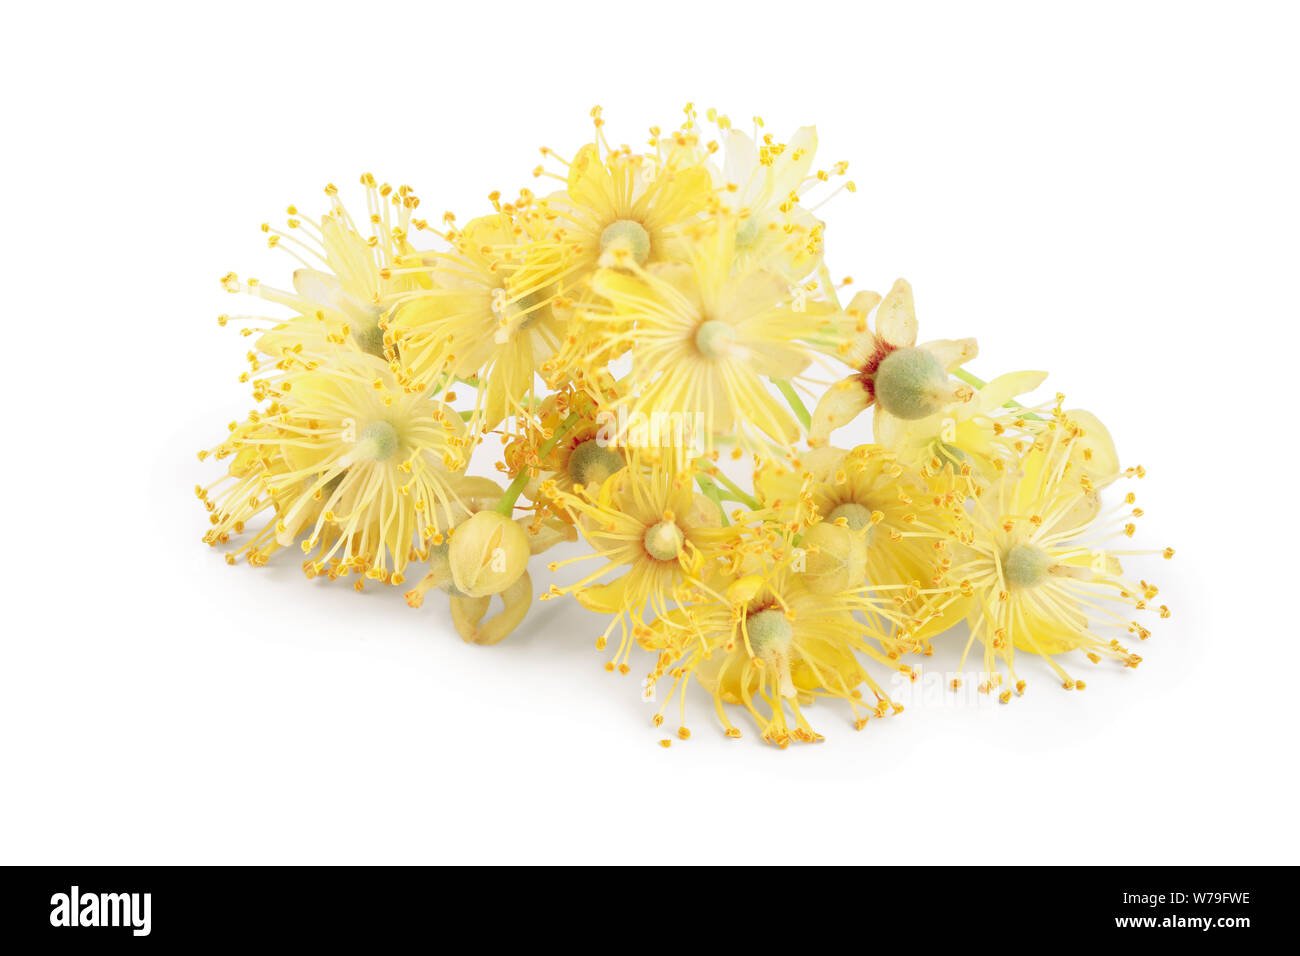 Linden flowers branch isolated on white background. Stock Photo